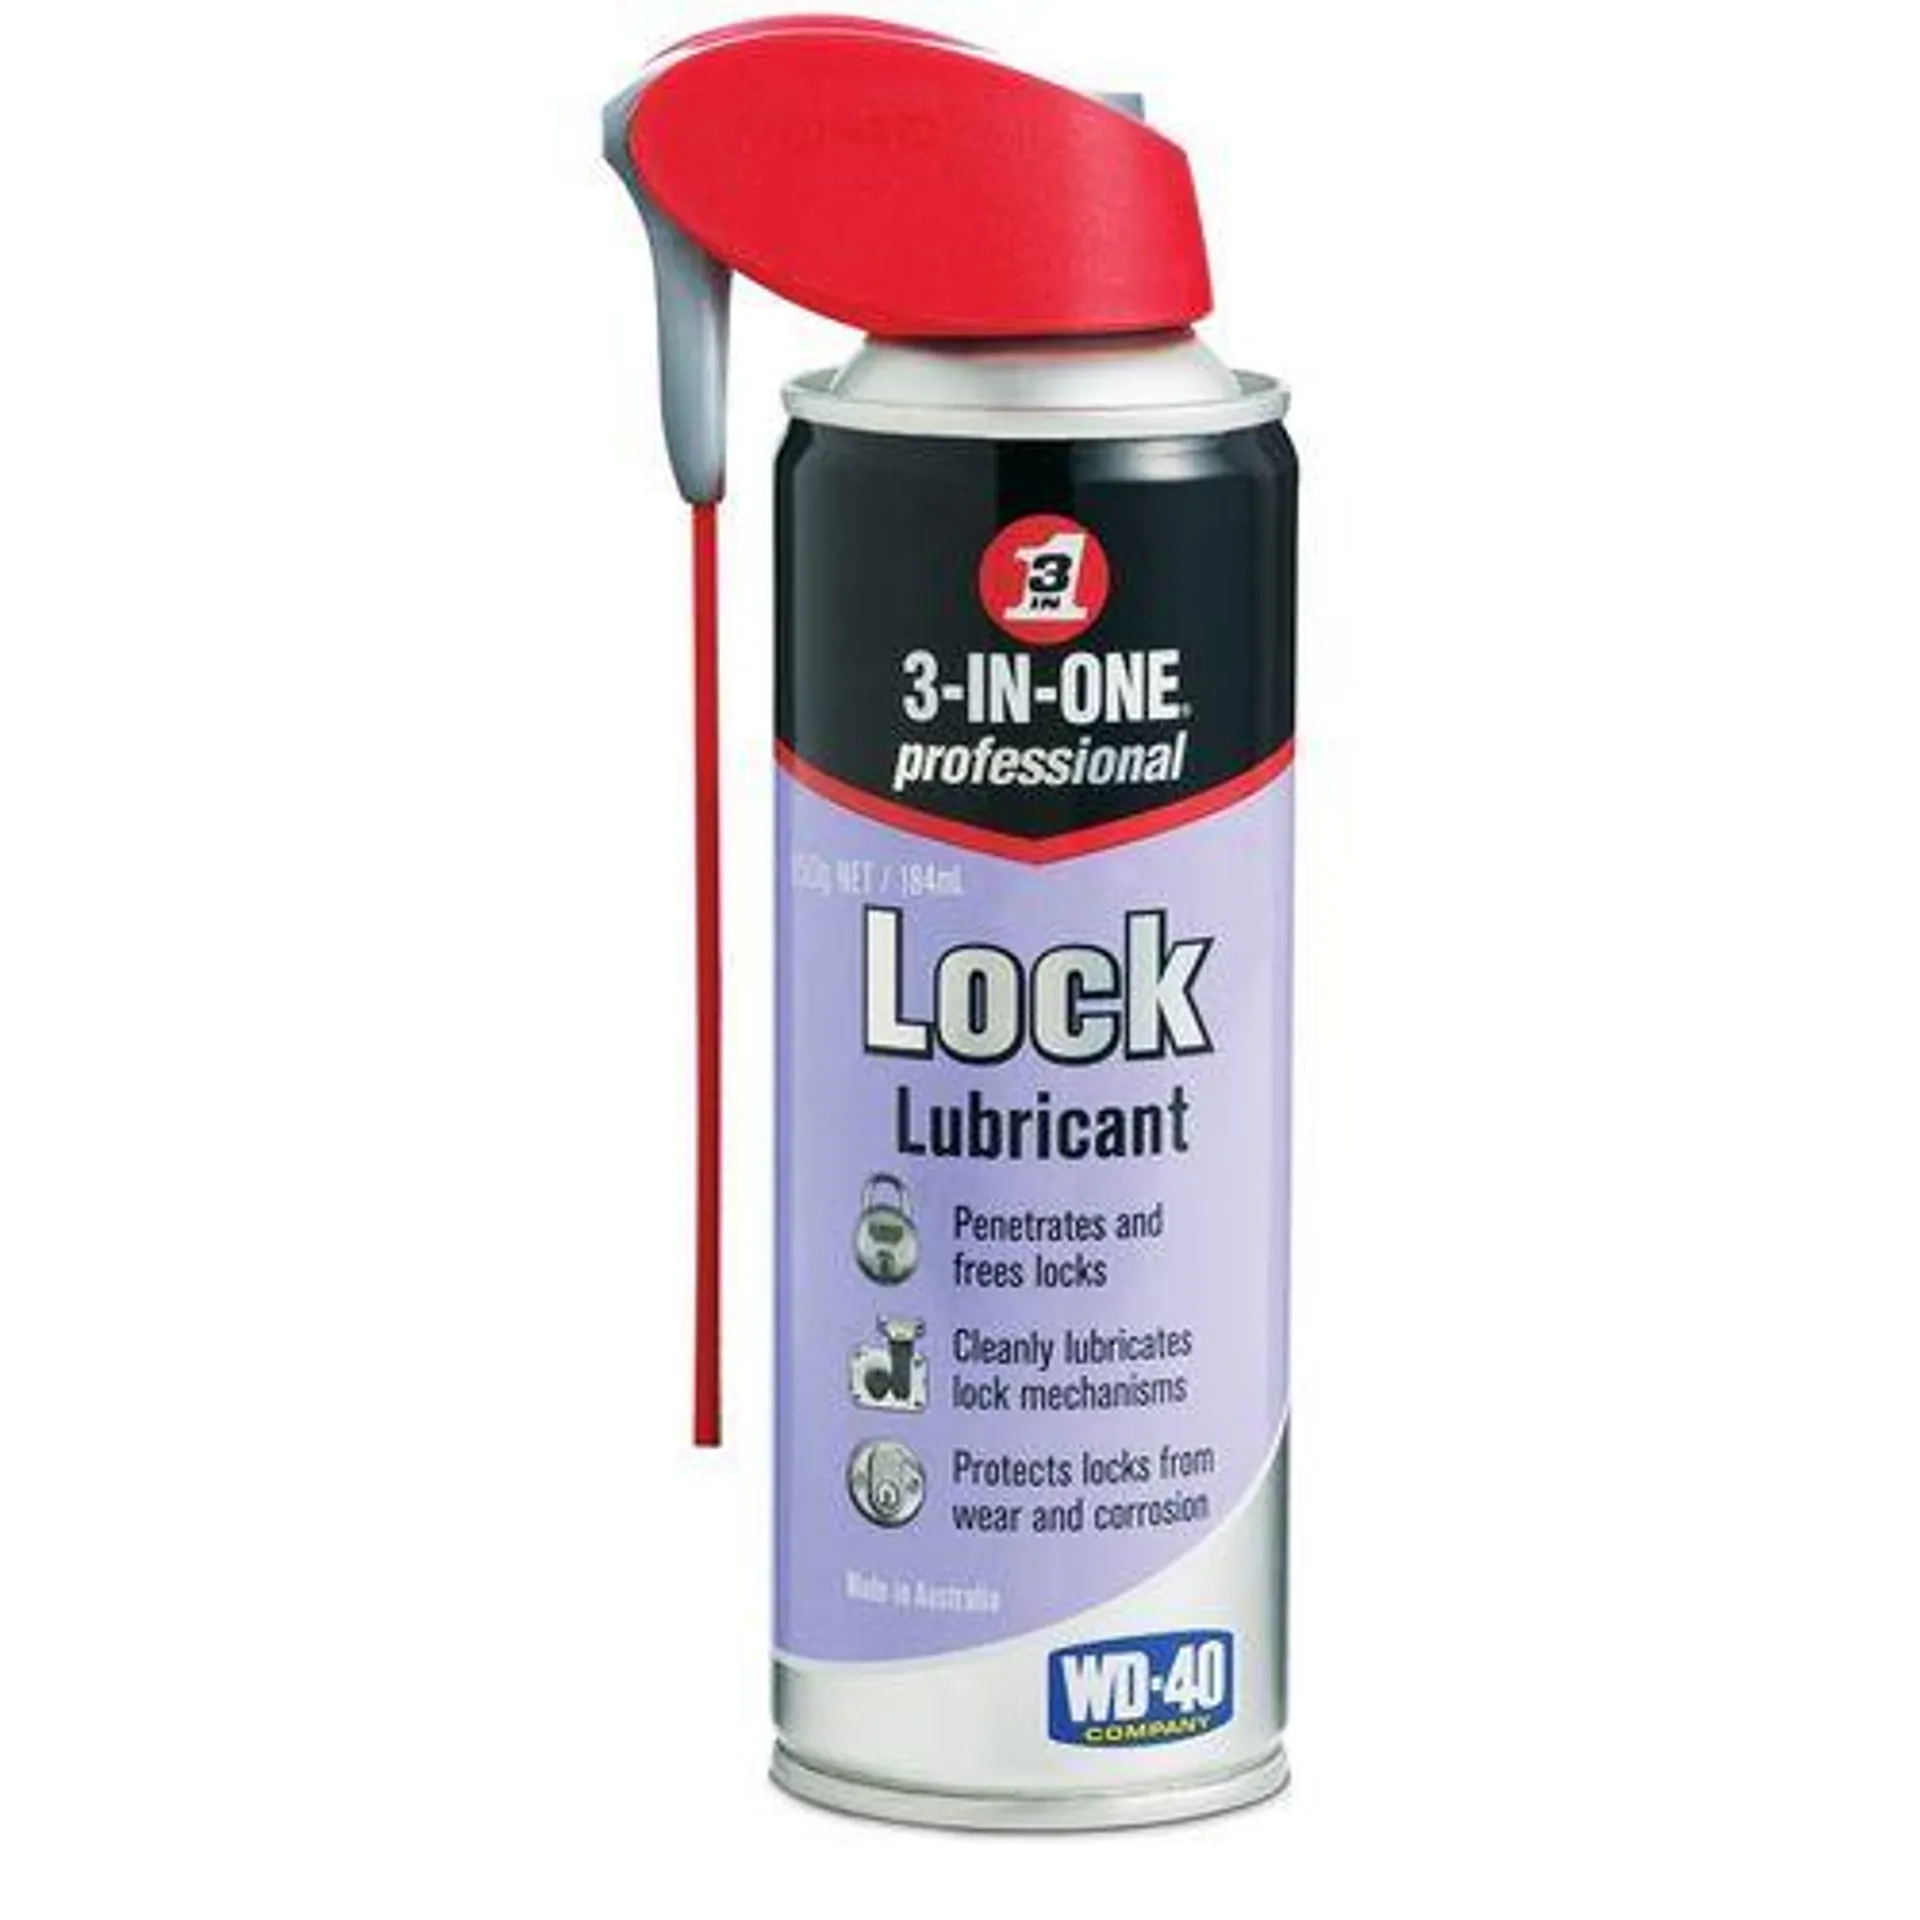 3-In-One 150g Lock Lubricant With Smart Straw